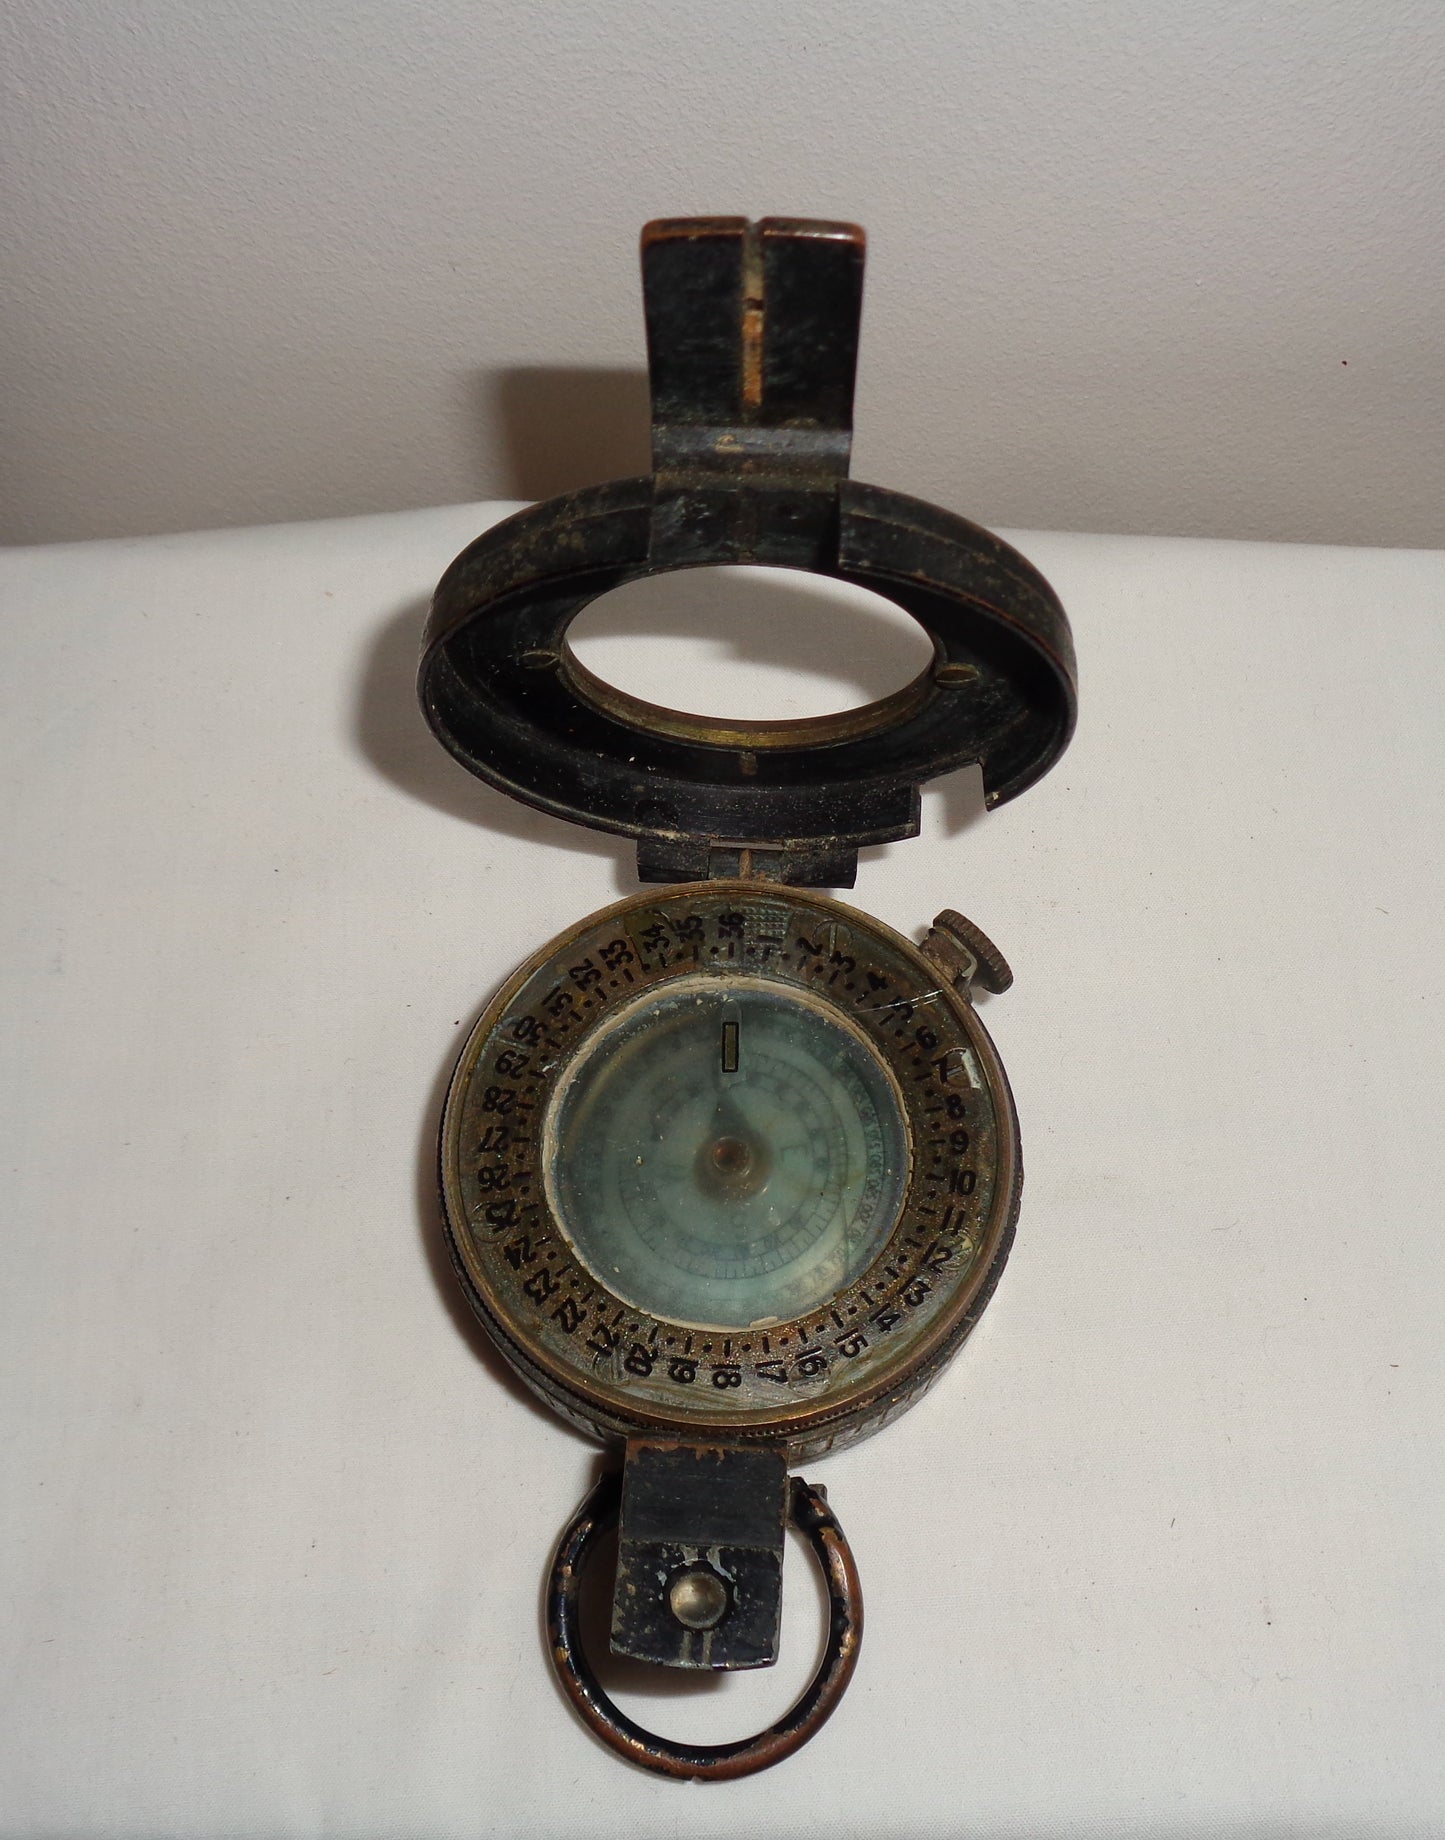 1941 WW2 TG & Co Mk III Officers Prismatic Military Marching Compass